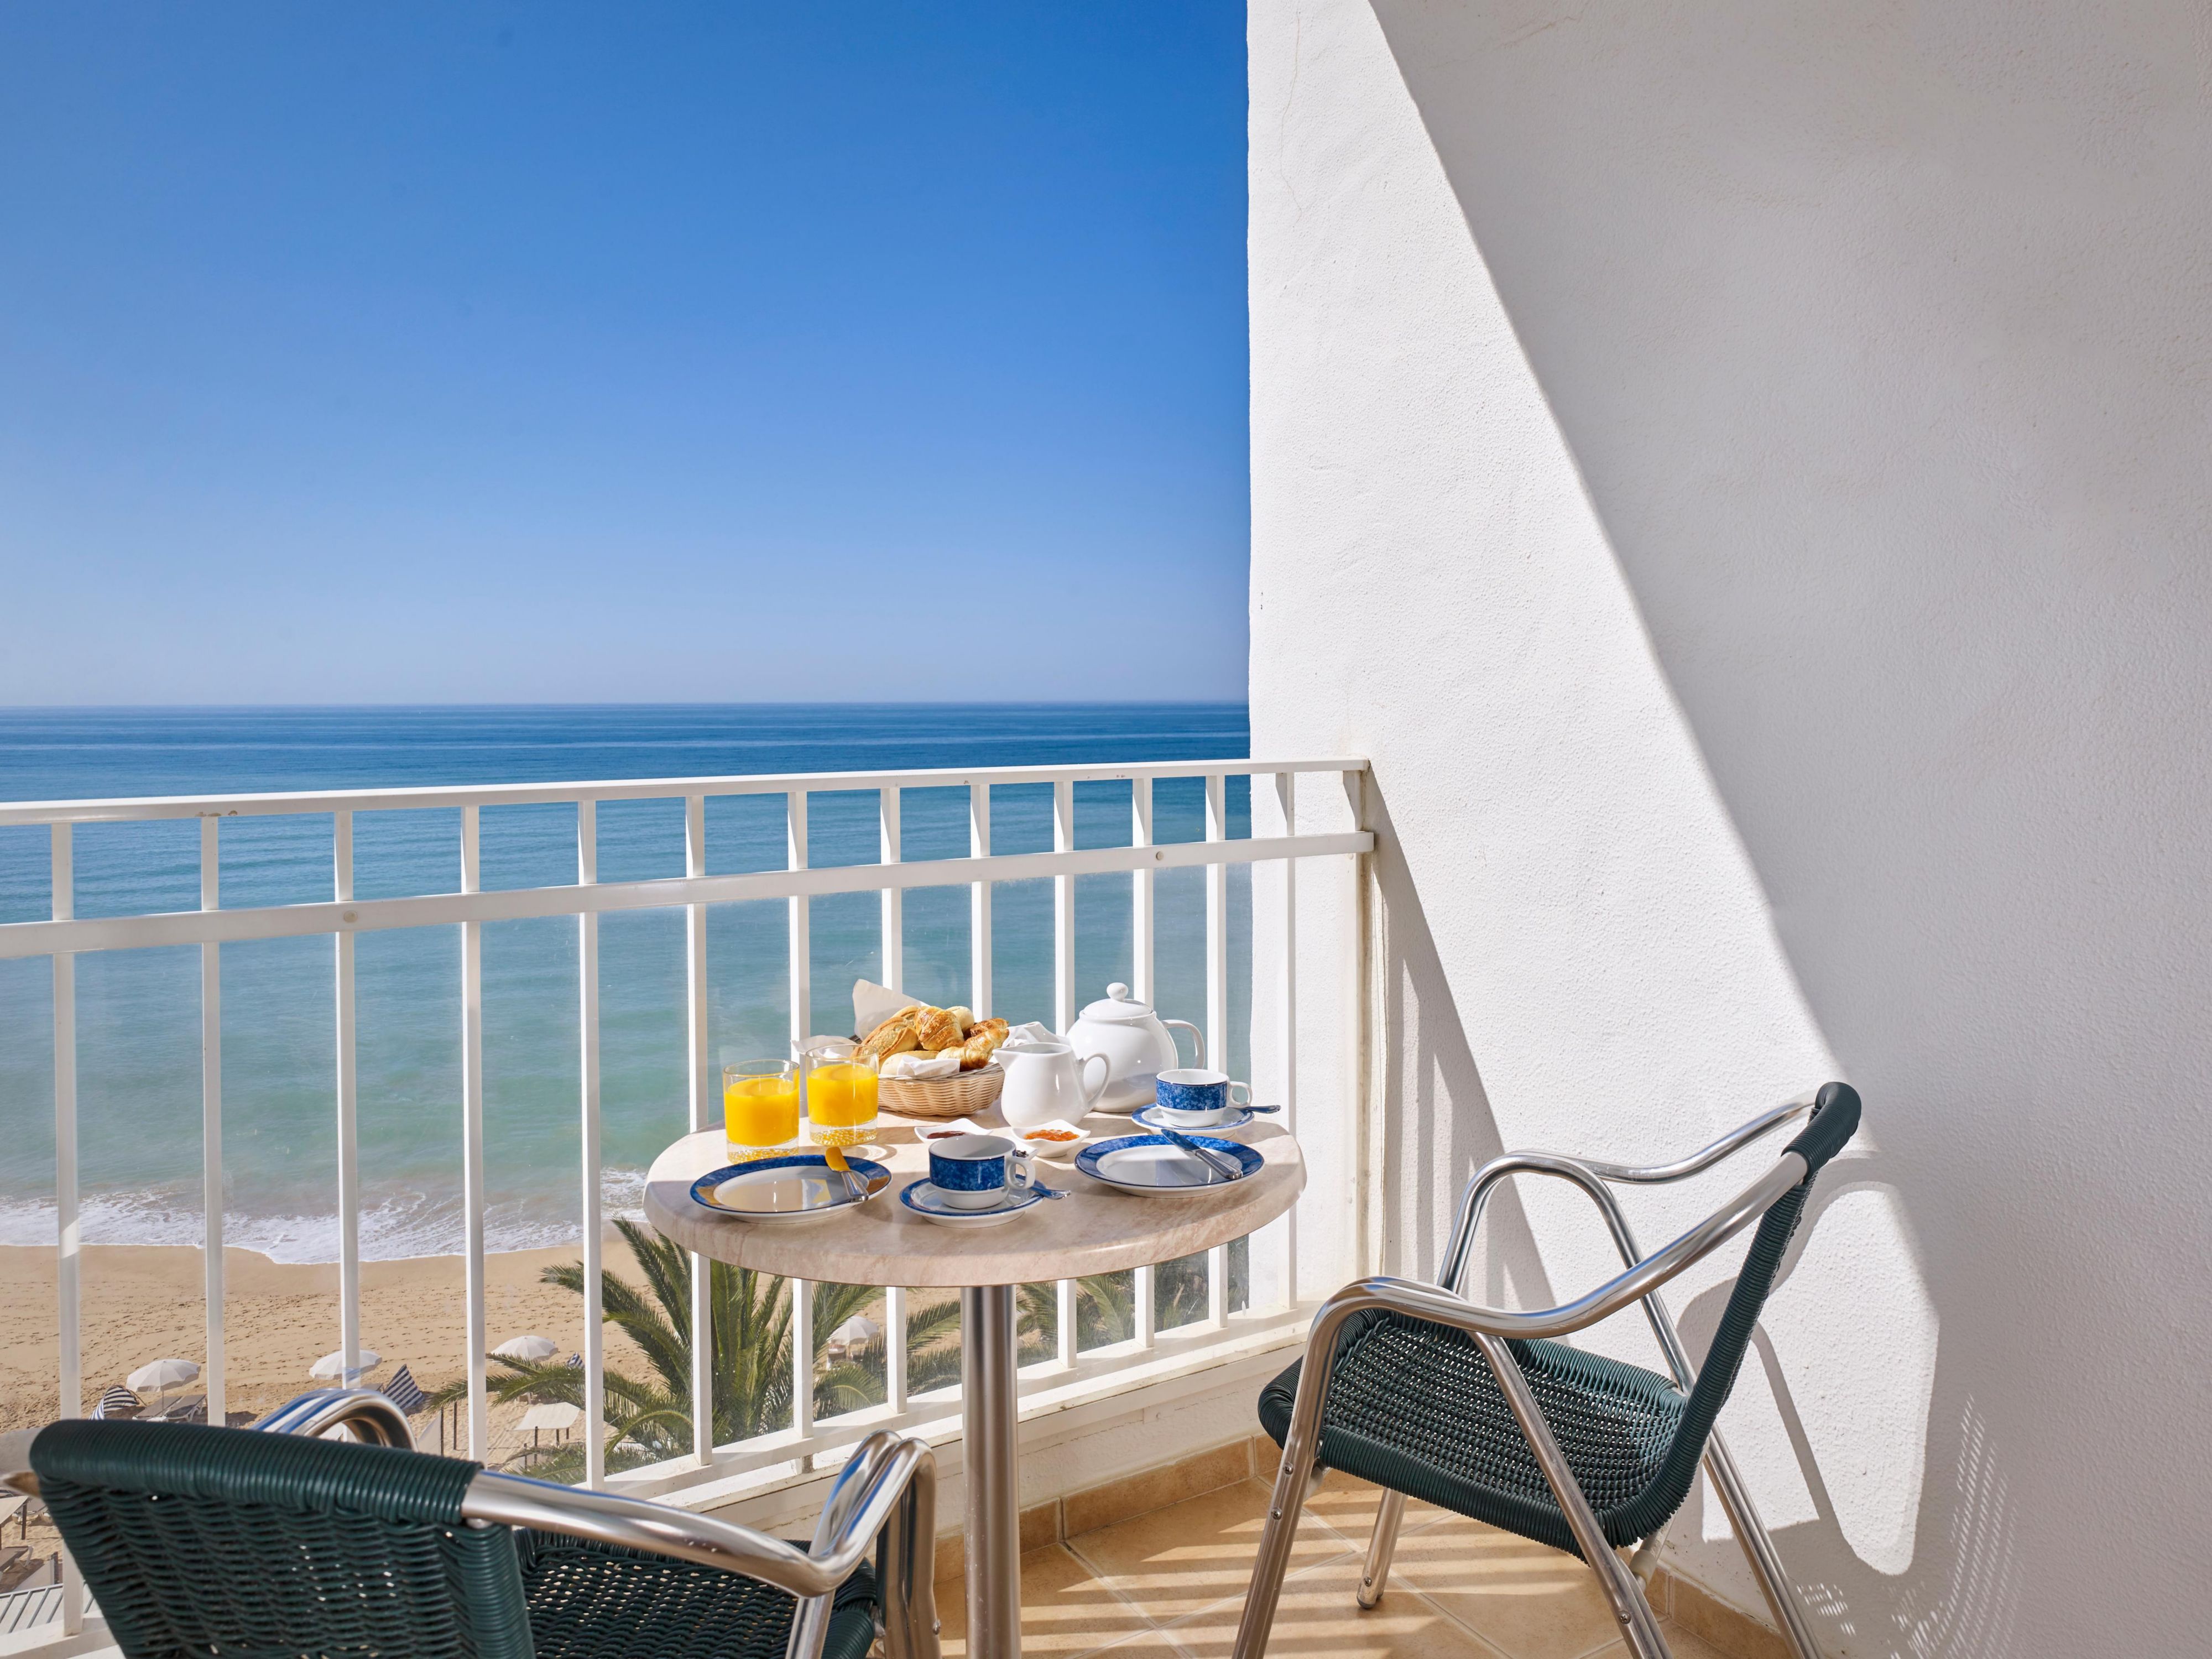 Why not make the most of your Holiday? Choose one of our gorgeous sea view room with your own personal balcony.